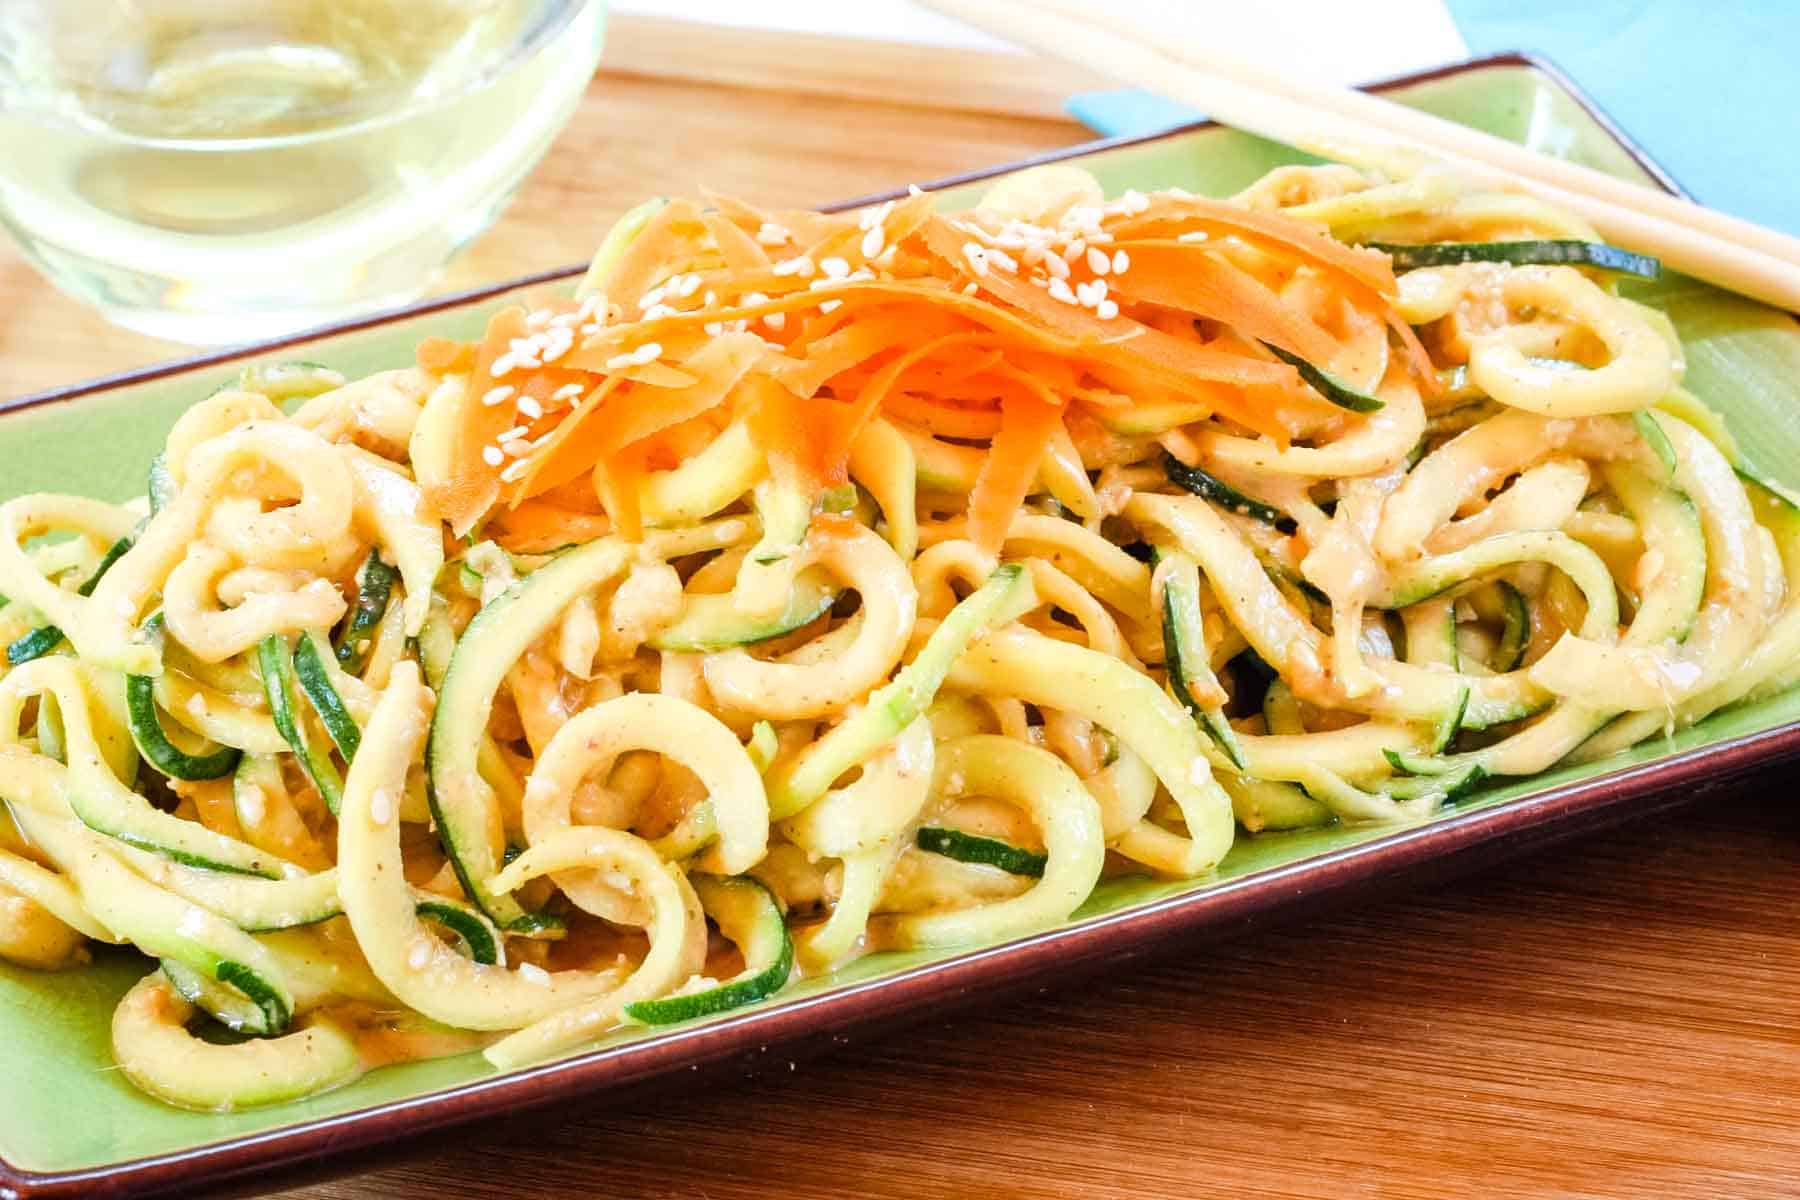 Cold Sesame Peanut Zucchini Noodles Salad topped with shredded carrots and sesame seeds on a green plate